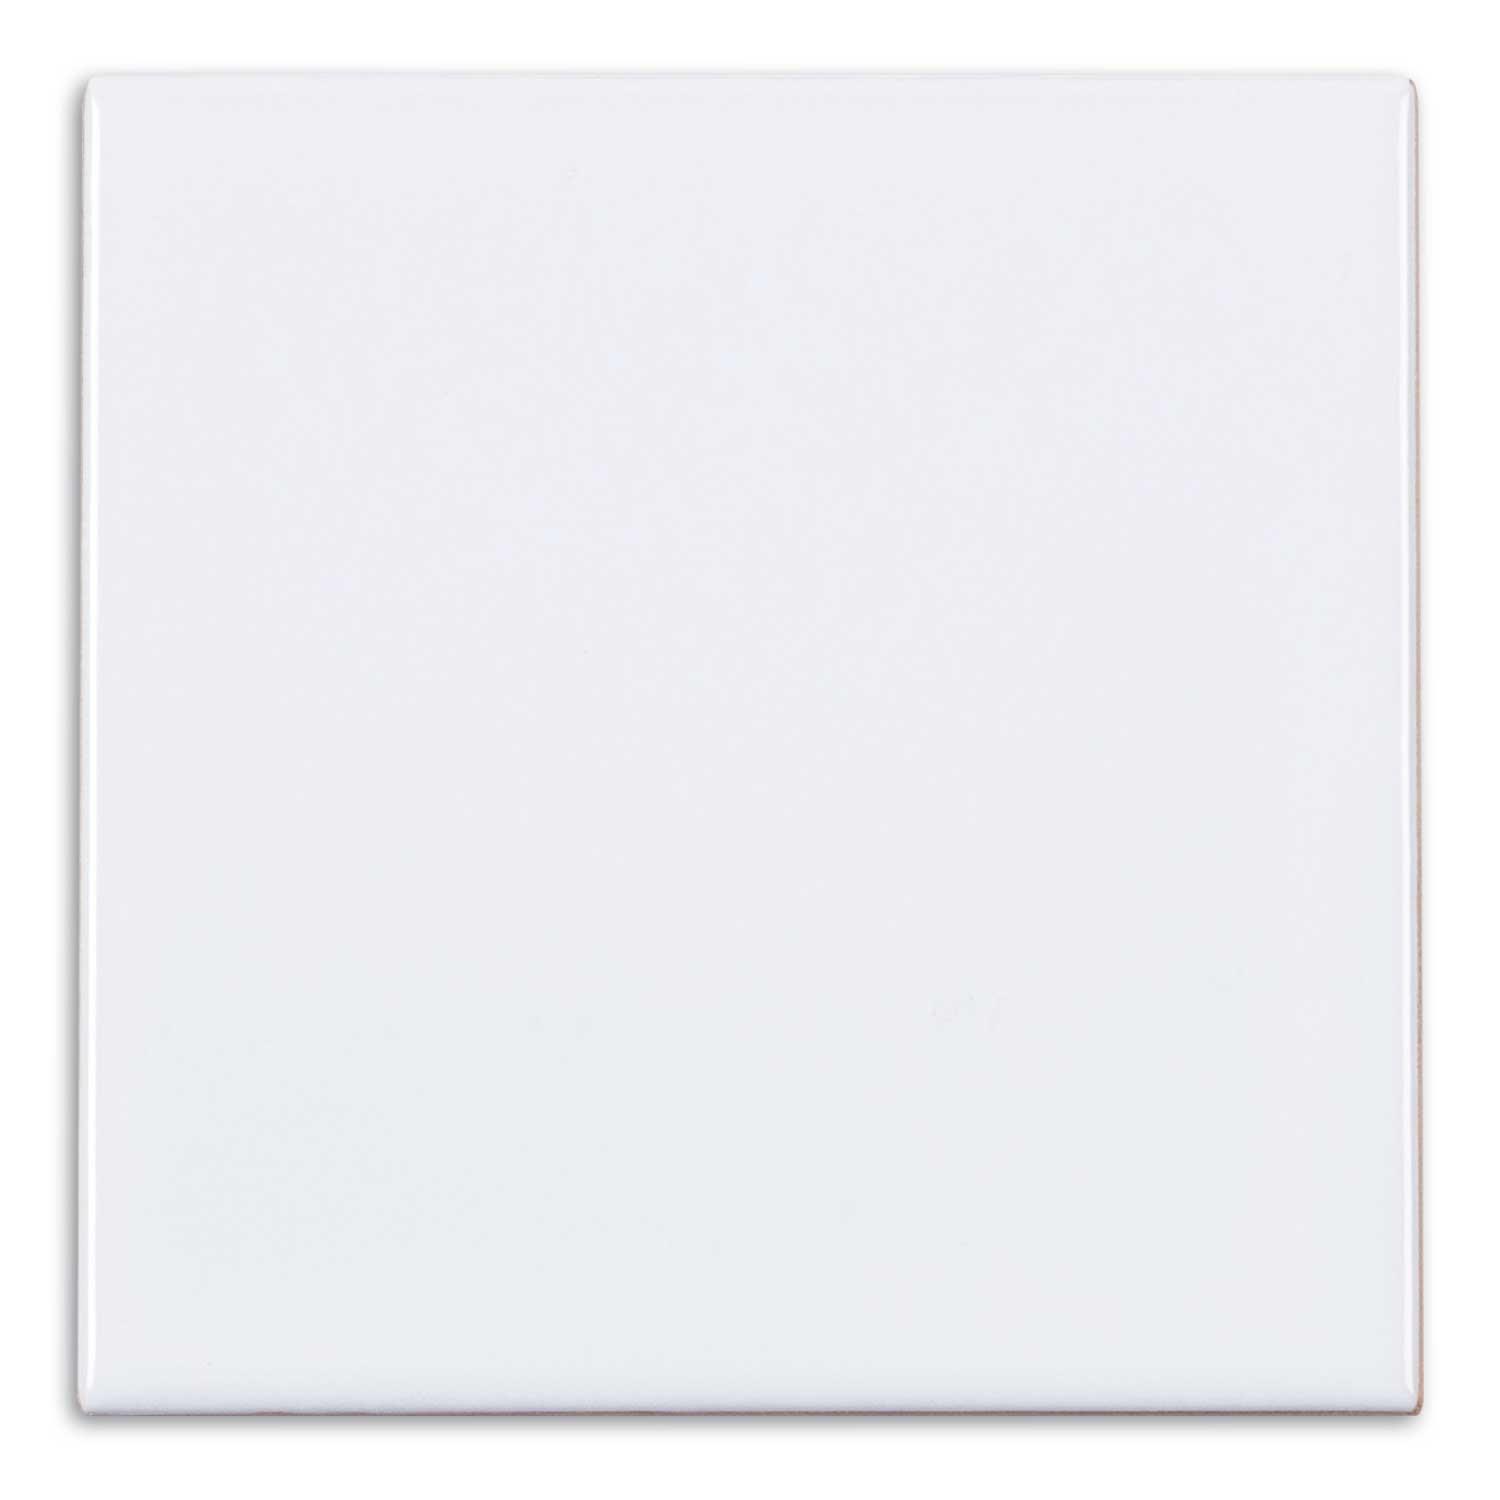 Classic Gloss White Ceramic Wall Tile Subway Style 200x200mm